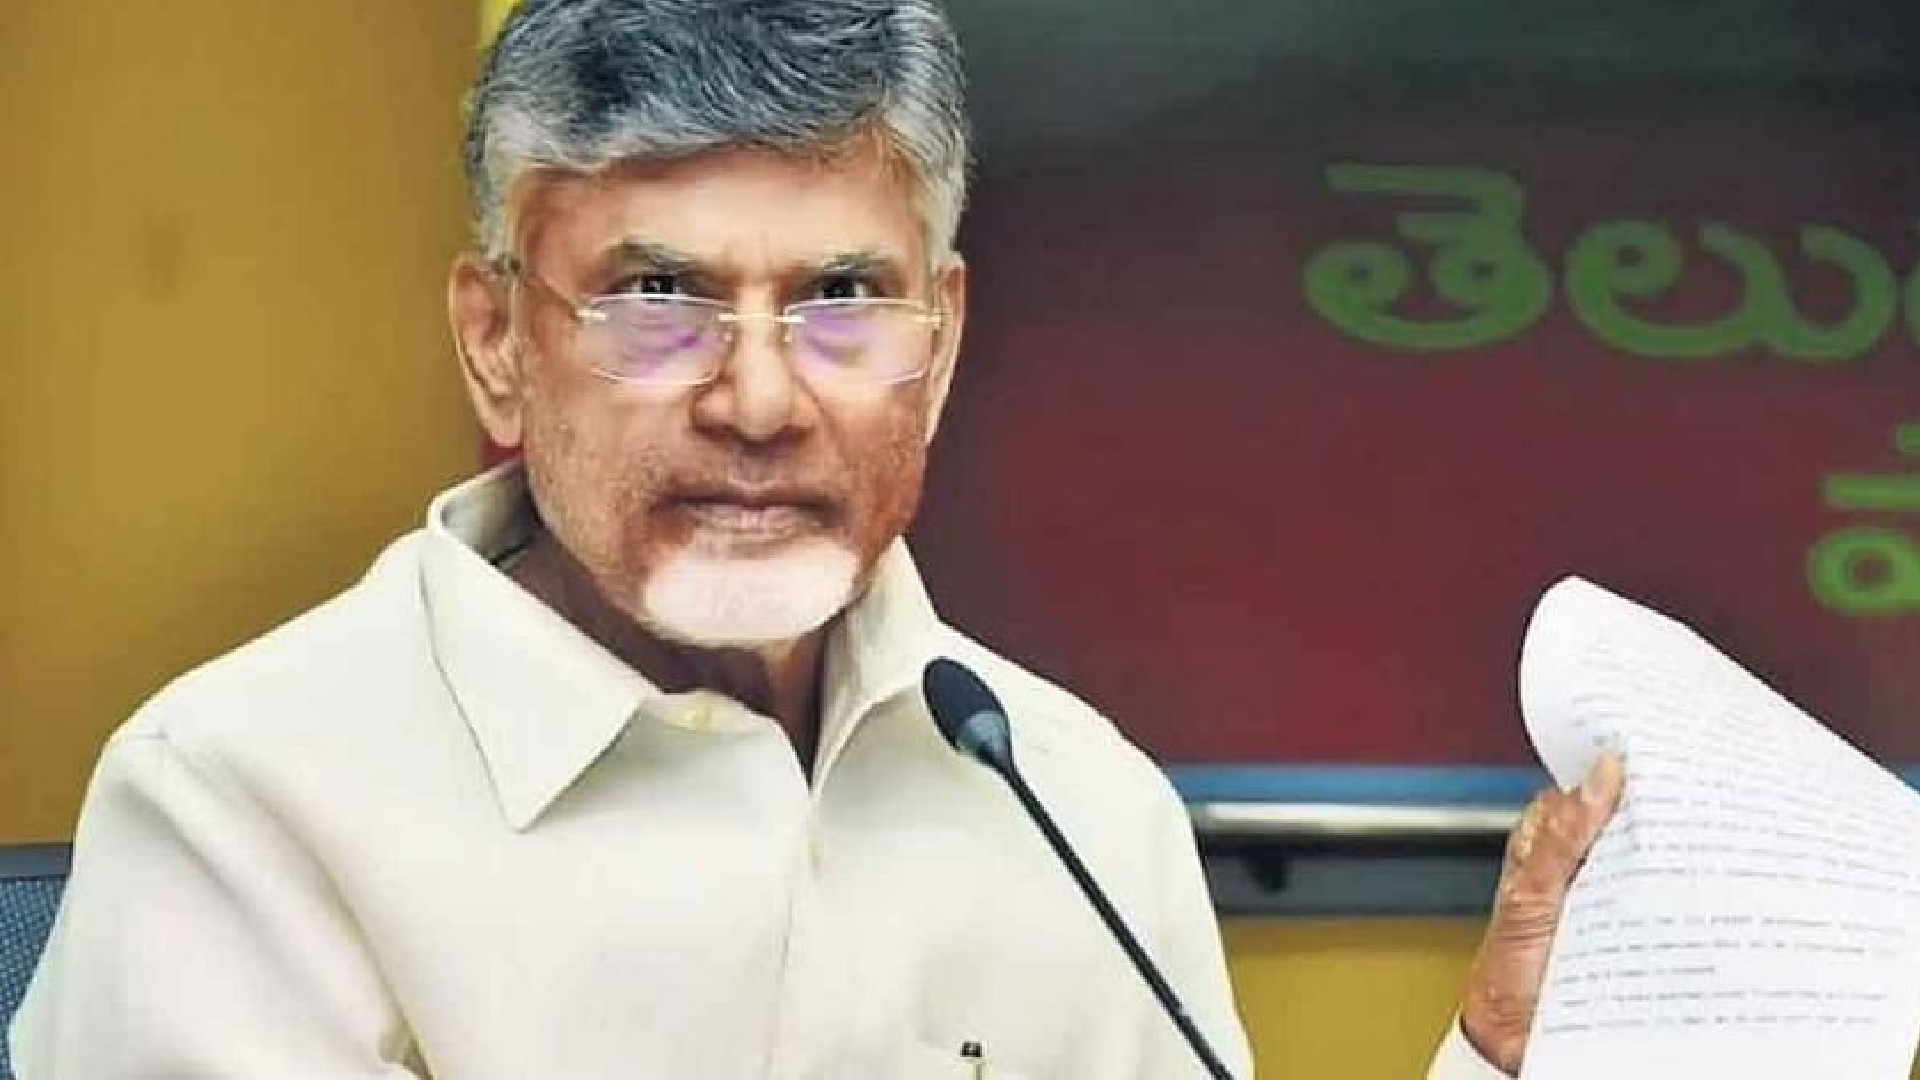 andhra-pradesh-tdp-president-chandrababu-serious-action-on-party-leaders-who-did-work-against-party